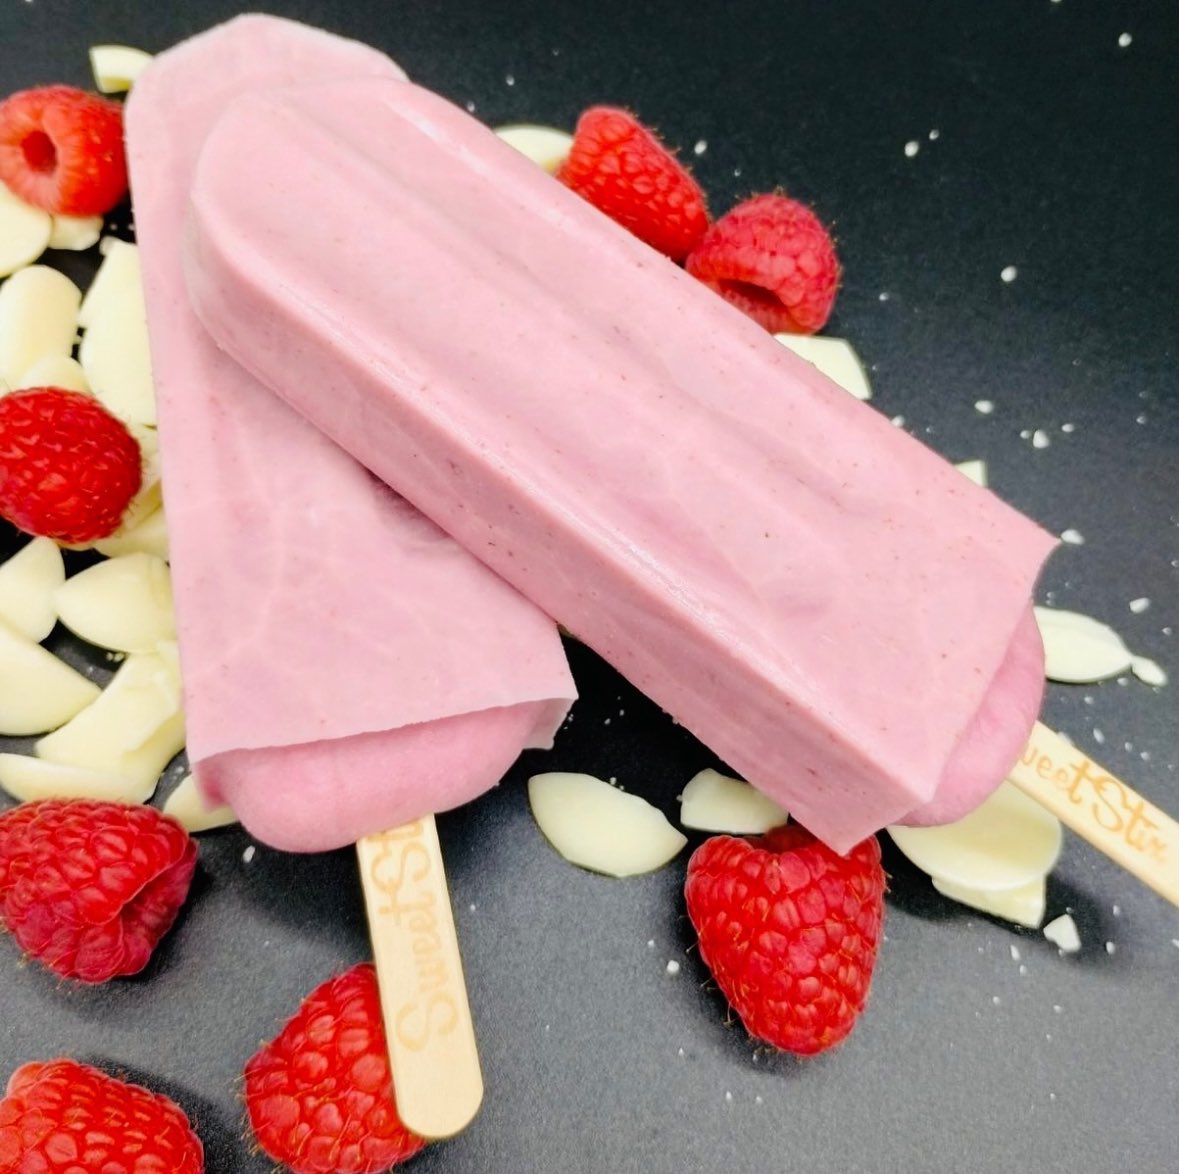 *New* Our Raspberry White Chocolate Pops are an exciting flavour combination that’s bound to get rave reviews from the whole family! ❤️ #yeg